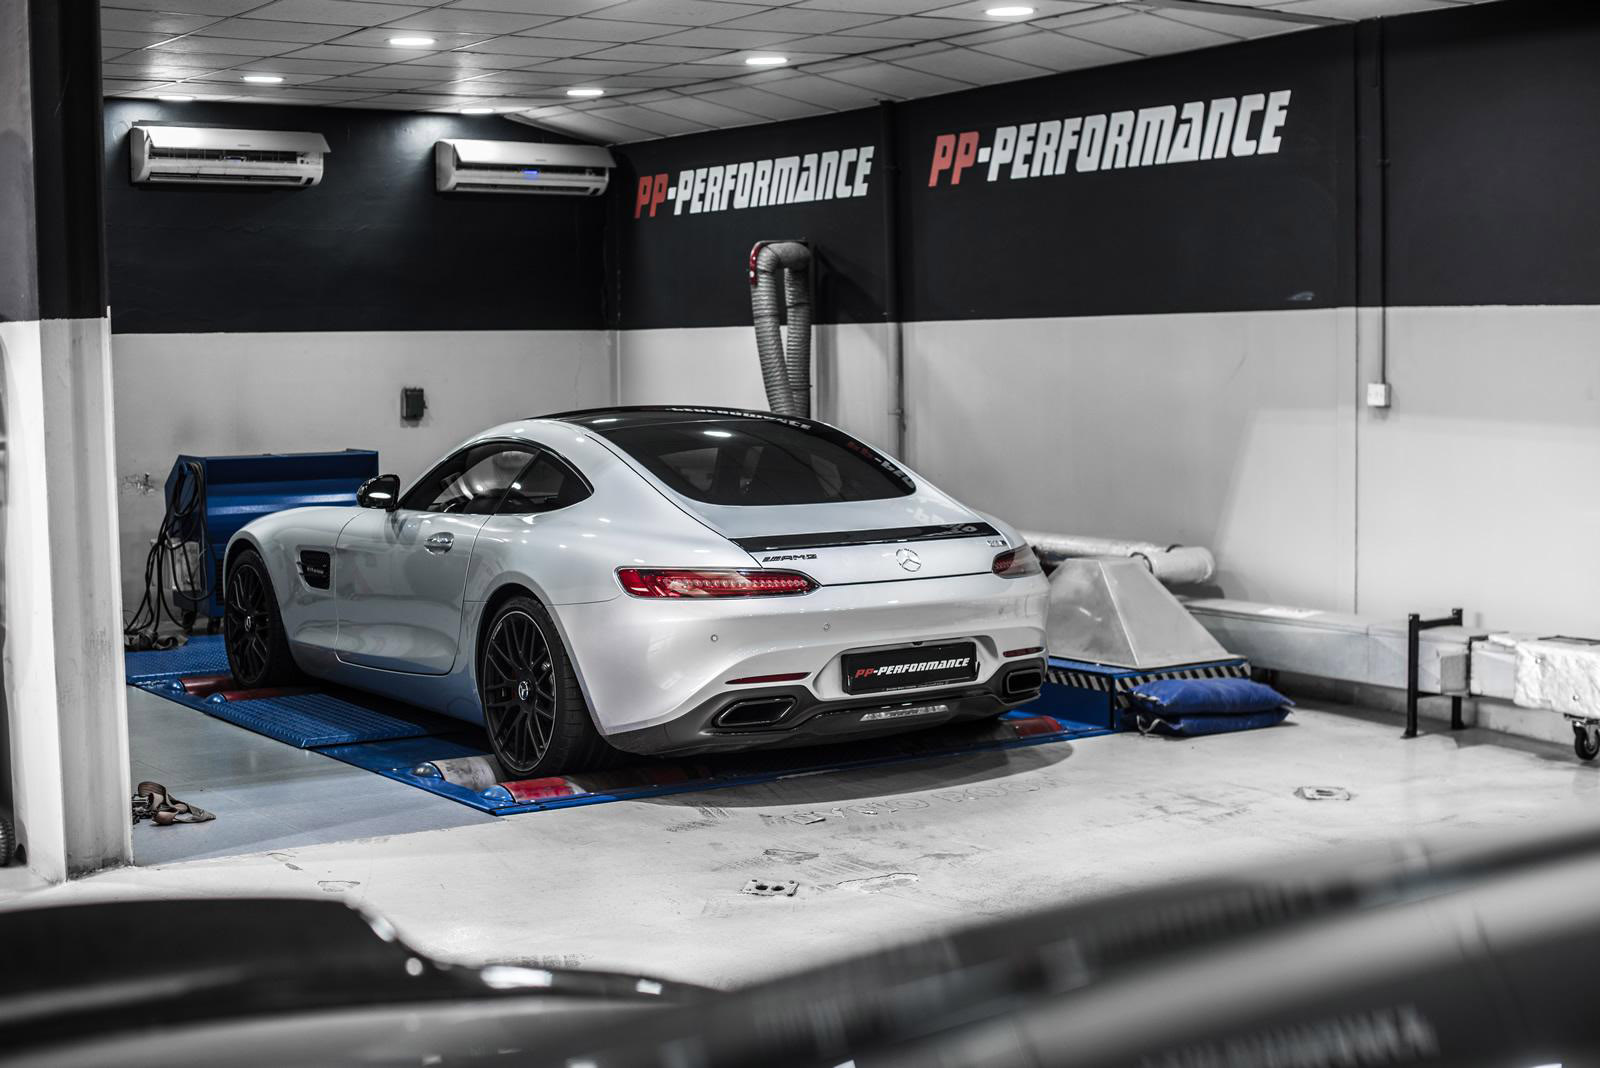 PP-Performance Mercedes-AMG GT S and Mercedes-AMG C63 S